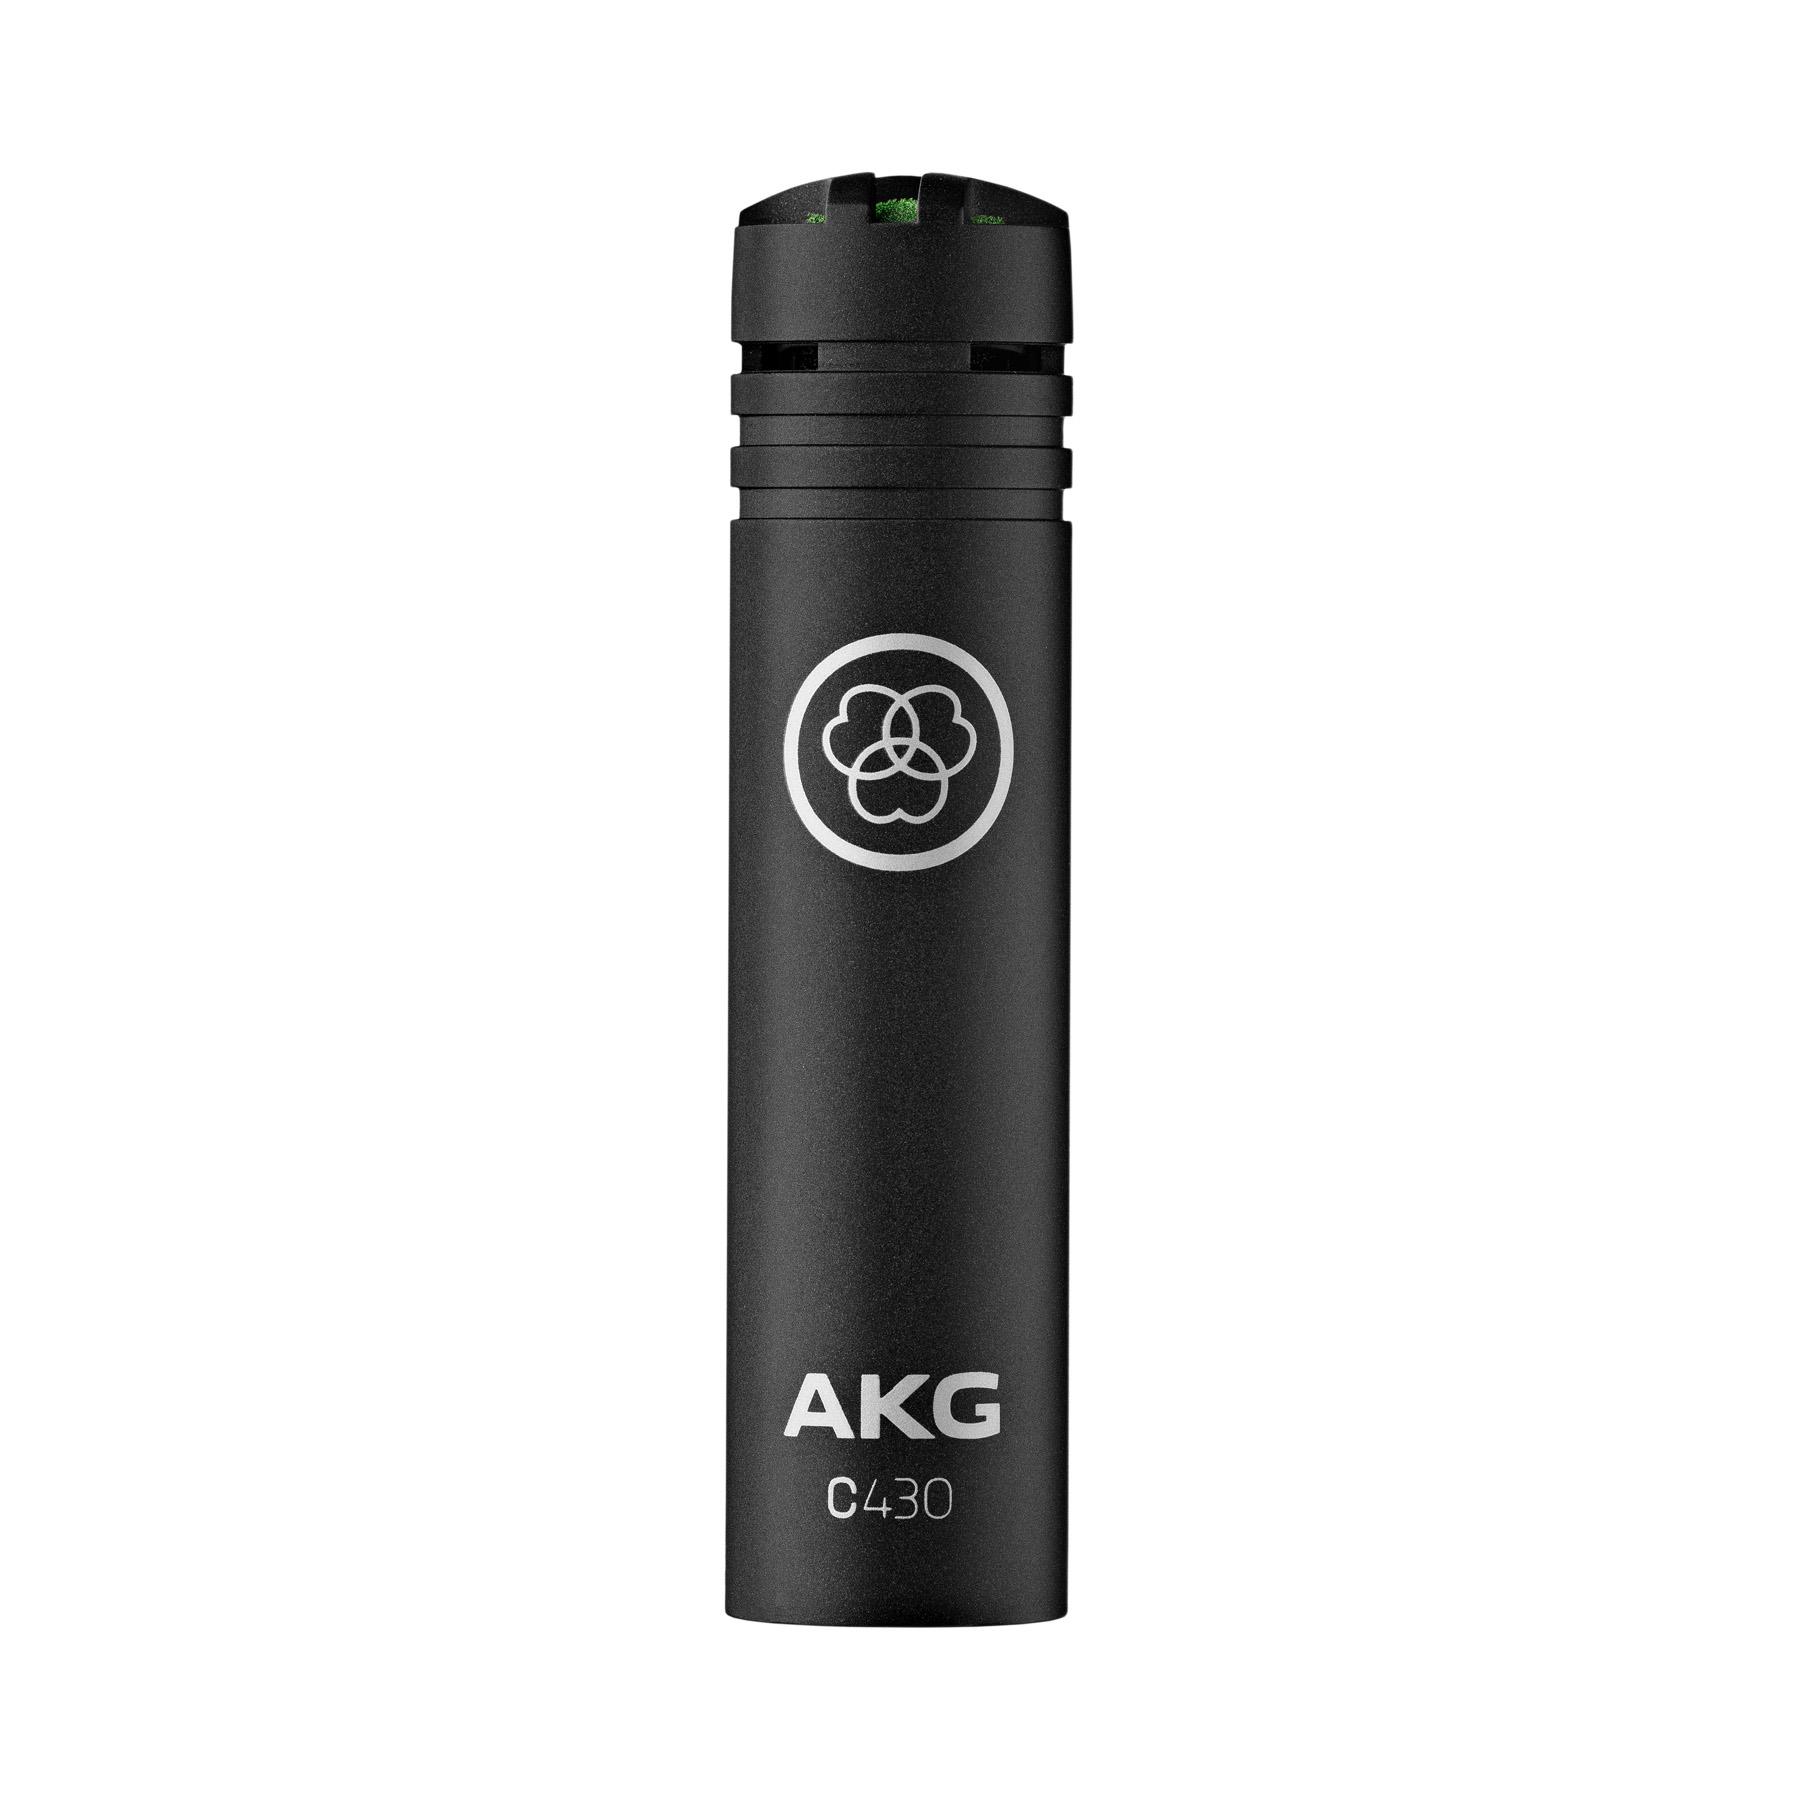 AKG C430 Microphone Stereo Pair Bundle with Mogami XLR Cables & Stereo Bar - image 2 of 5